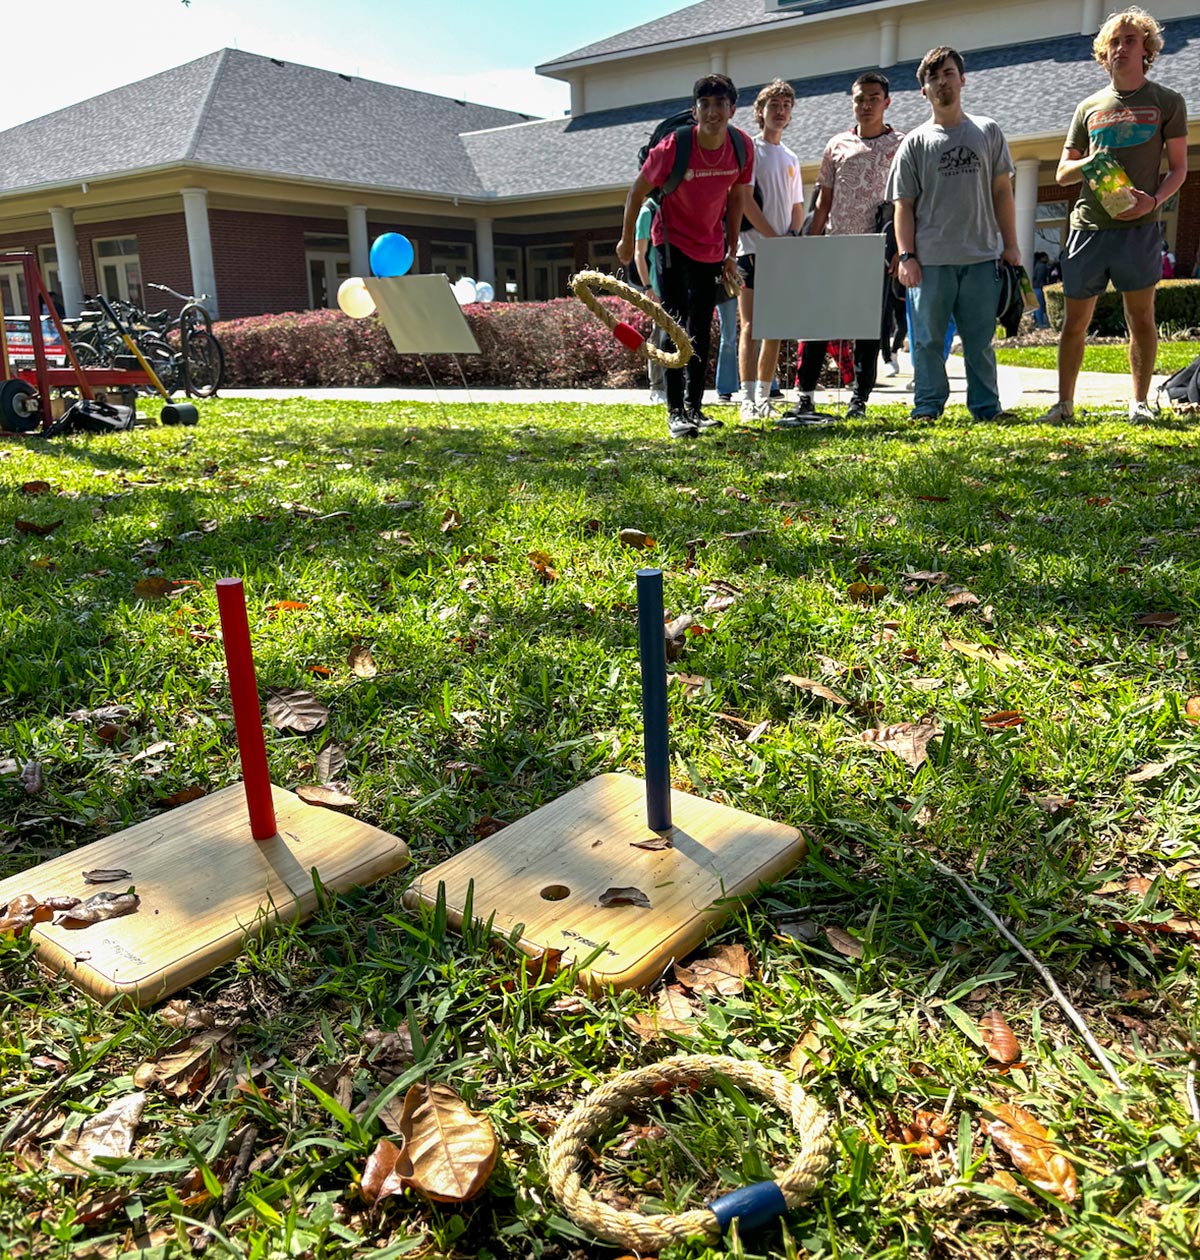 Students play ring toss during the Lamar University 100 Year Celebration, Mar. 5, in the Dining Hall Lawn. UP photo by Meredith Winkler.